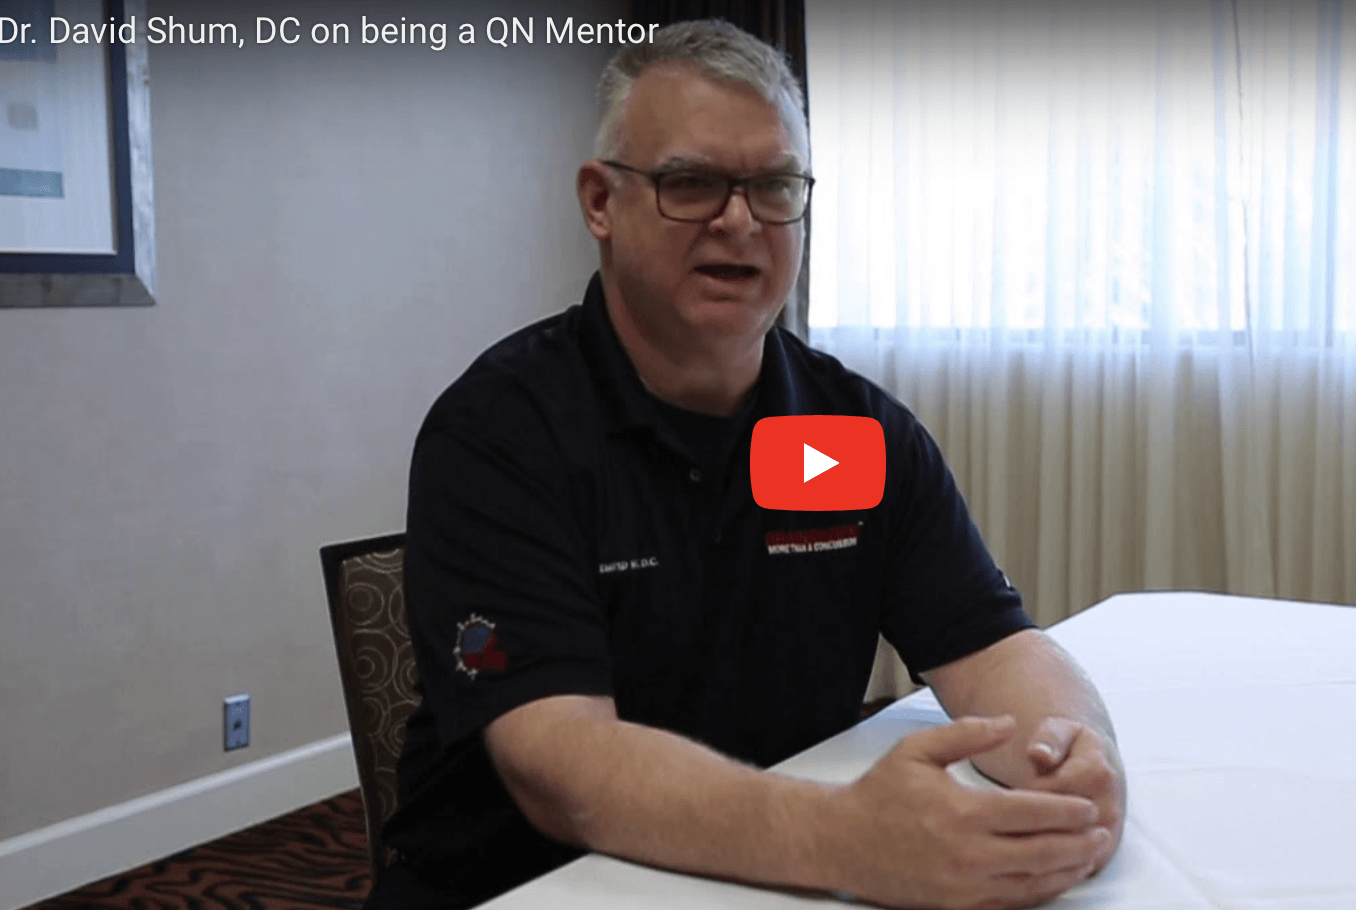 Playing an important role as a QN Mentor